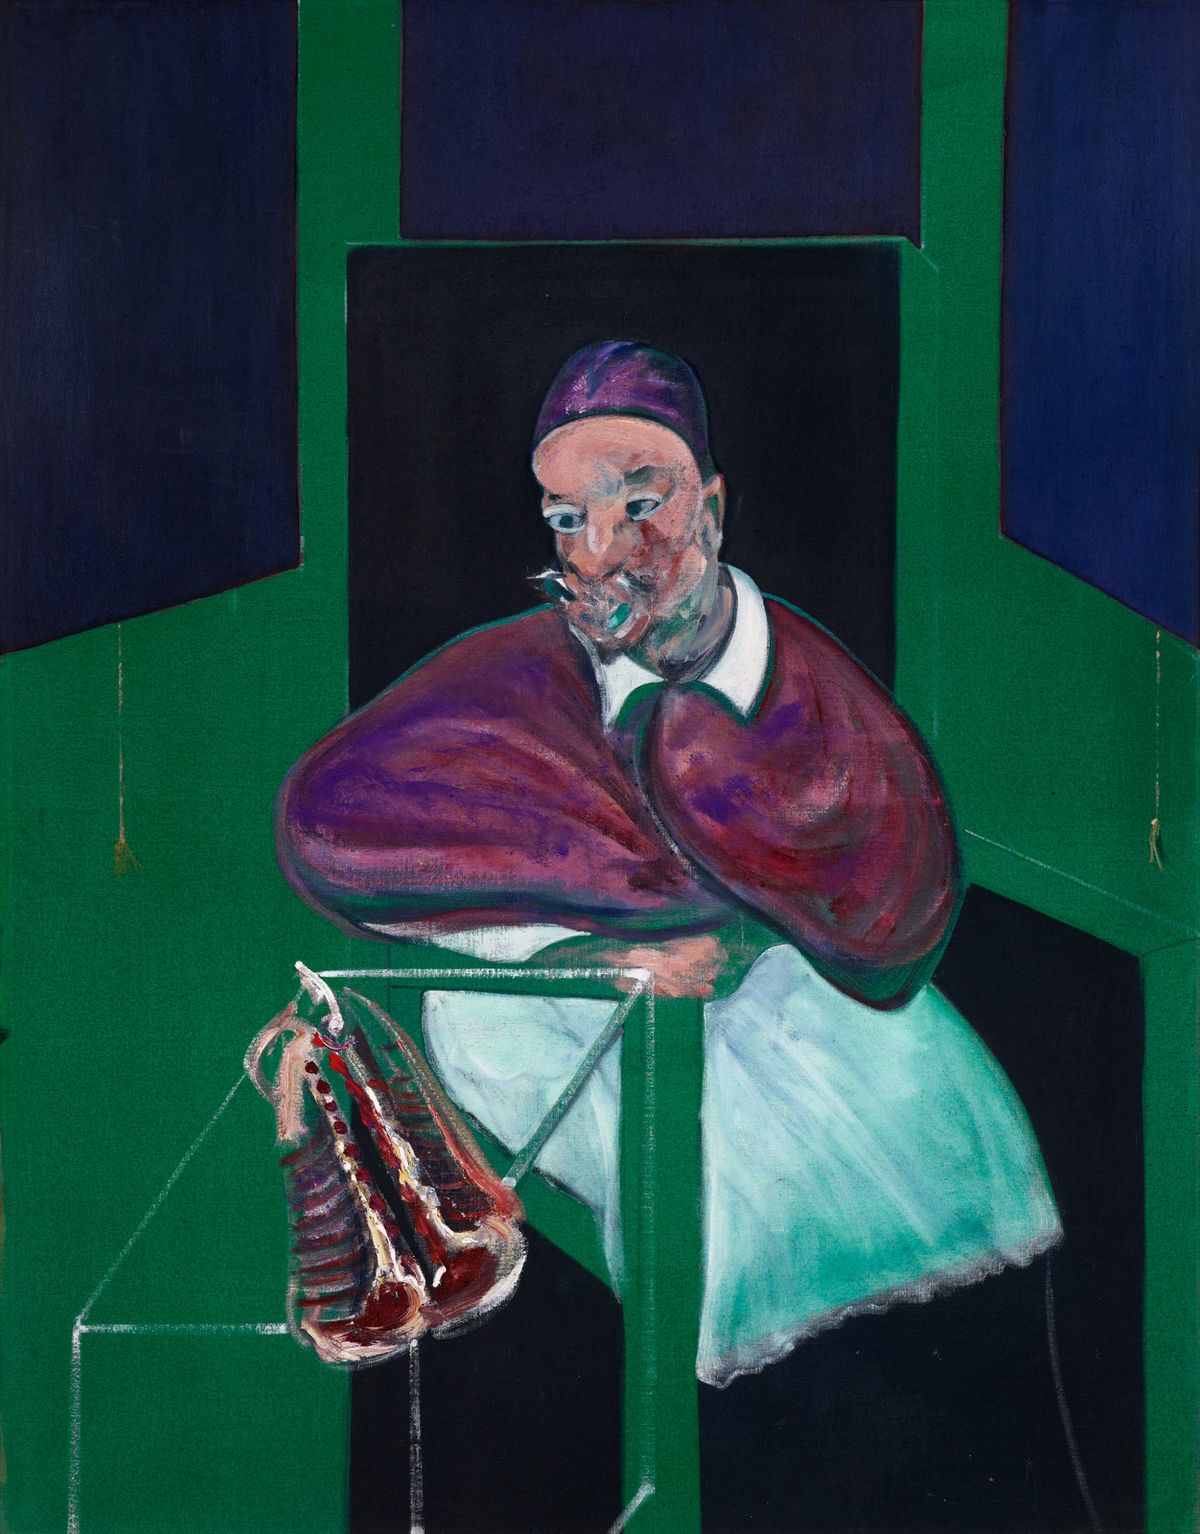 Some scientists suggest that Bacon’s device of distorting faces and bodies, as in Pope No. 2 (1960), produces neural, as well as aesthetic, shocks © The Estate of Francis Bacon